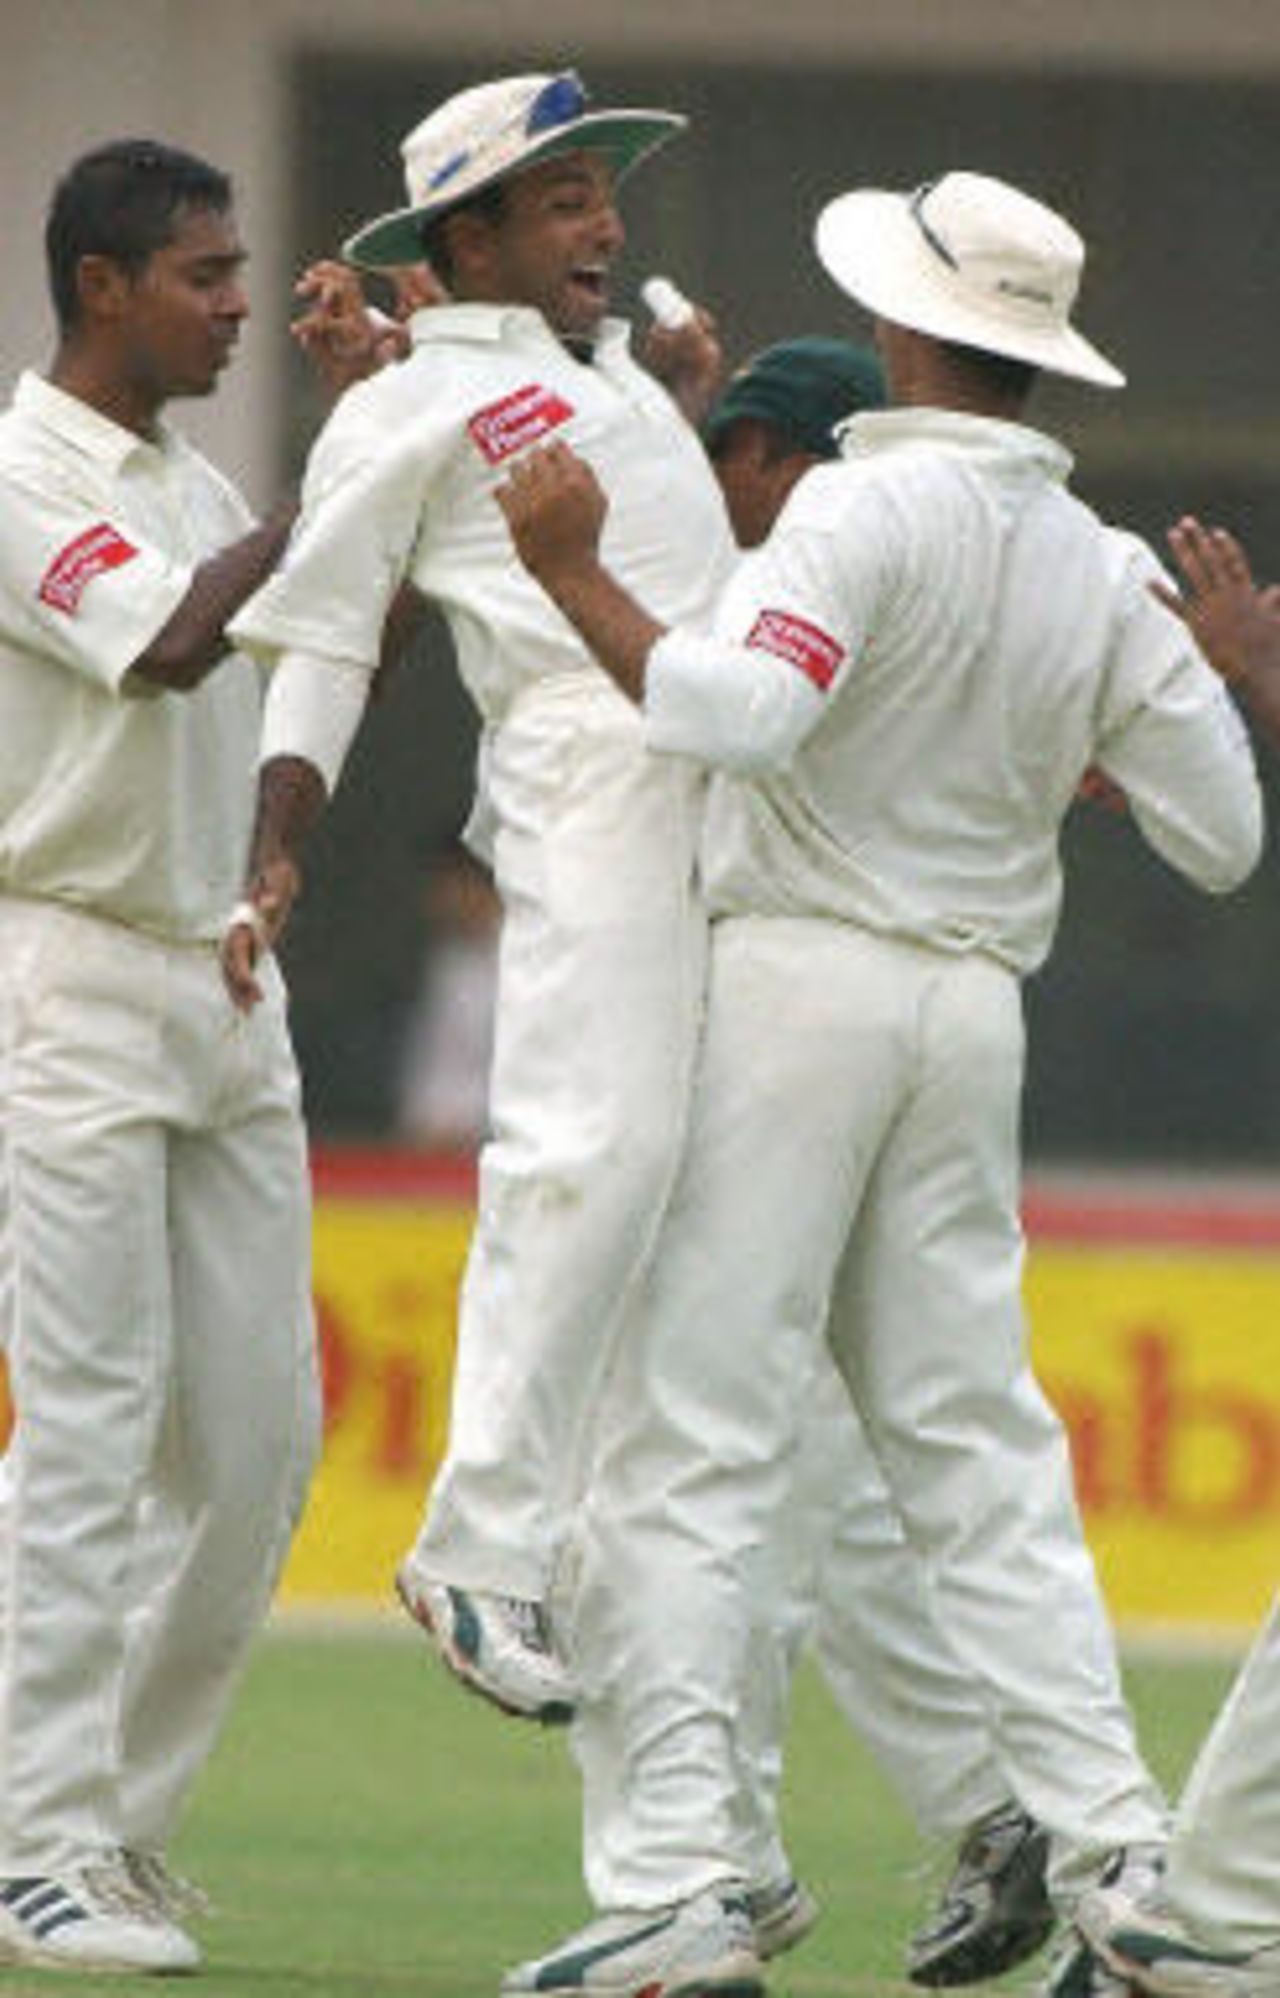 Javed Omar jumps in the air to celebrate with his teammates, Pakistan v Bangladesh, 3rd Test, Multan, September 5, 2003.